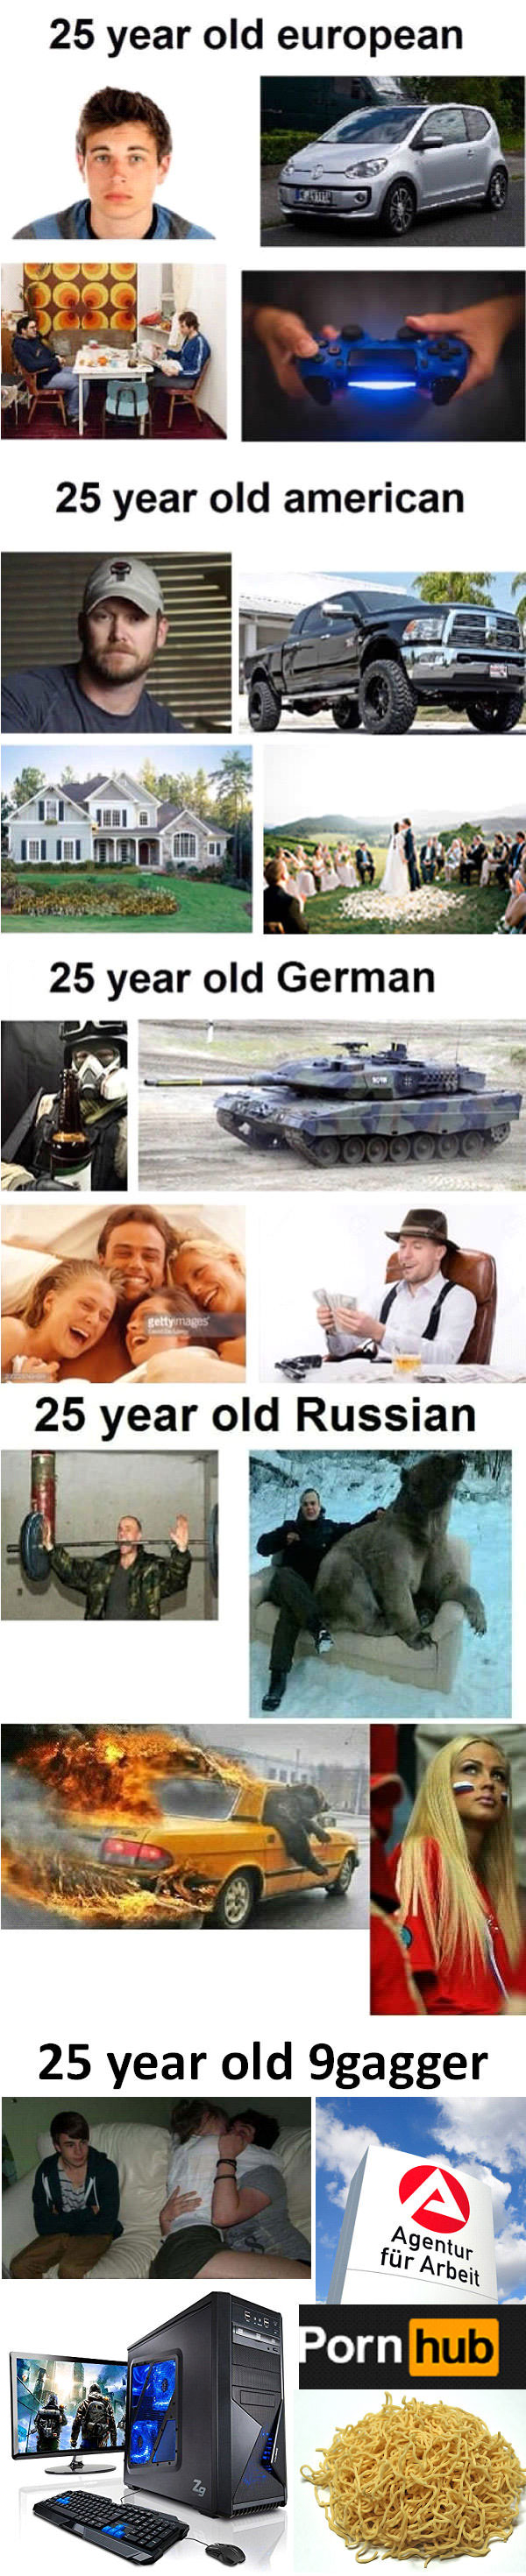 25 year olds from various places, european, american, german, russian, 9gagger